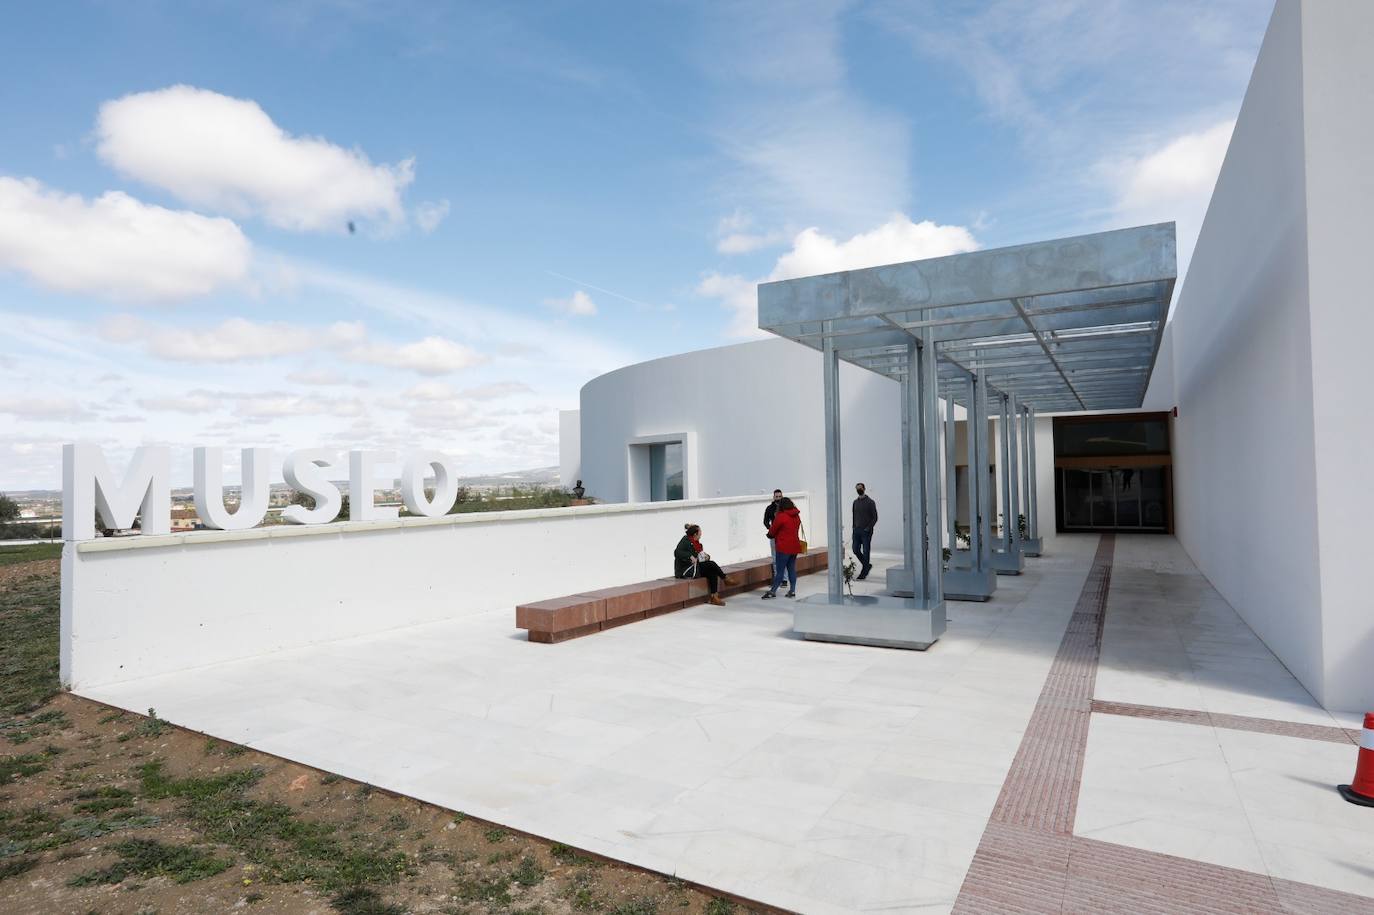 The centre, officially opened by the president of the Junta de Andalucía, now hosts four exhibitions